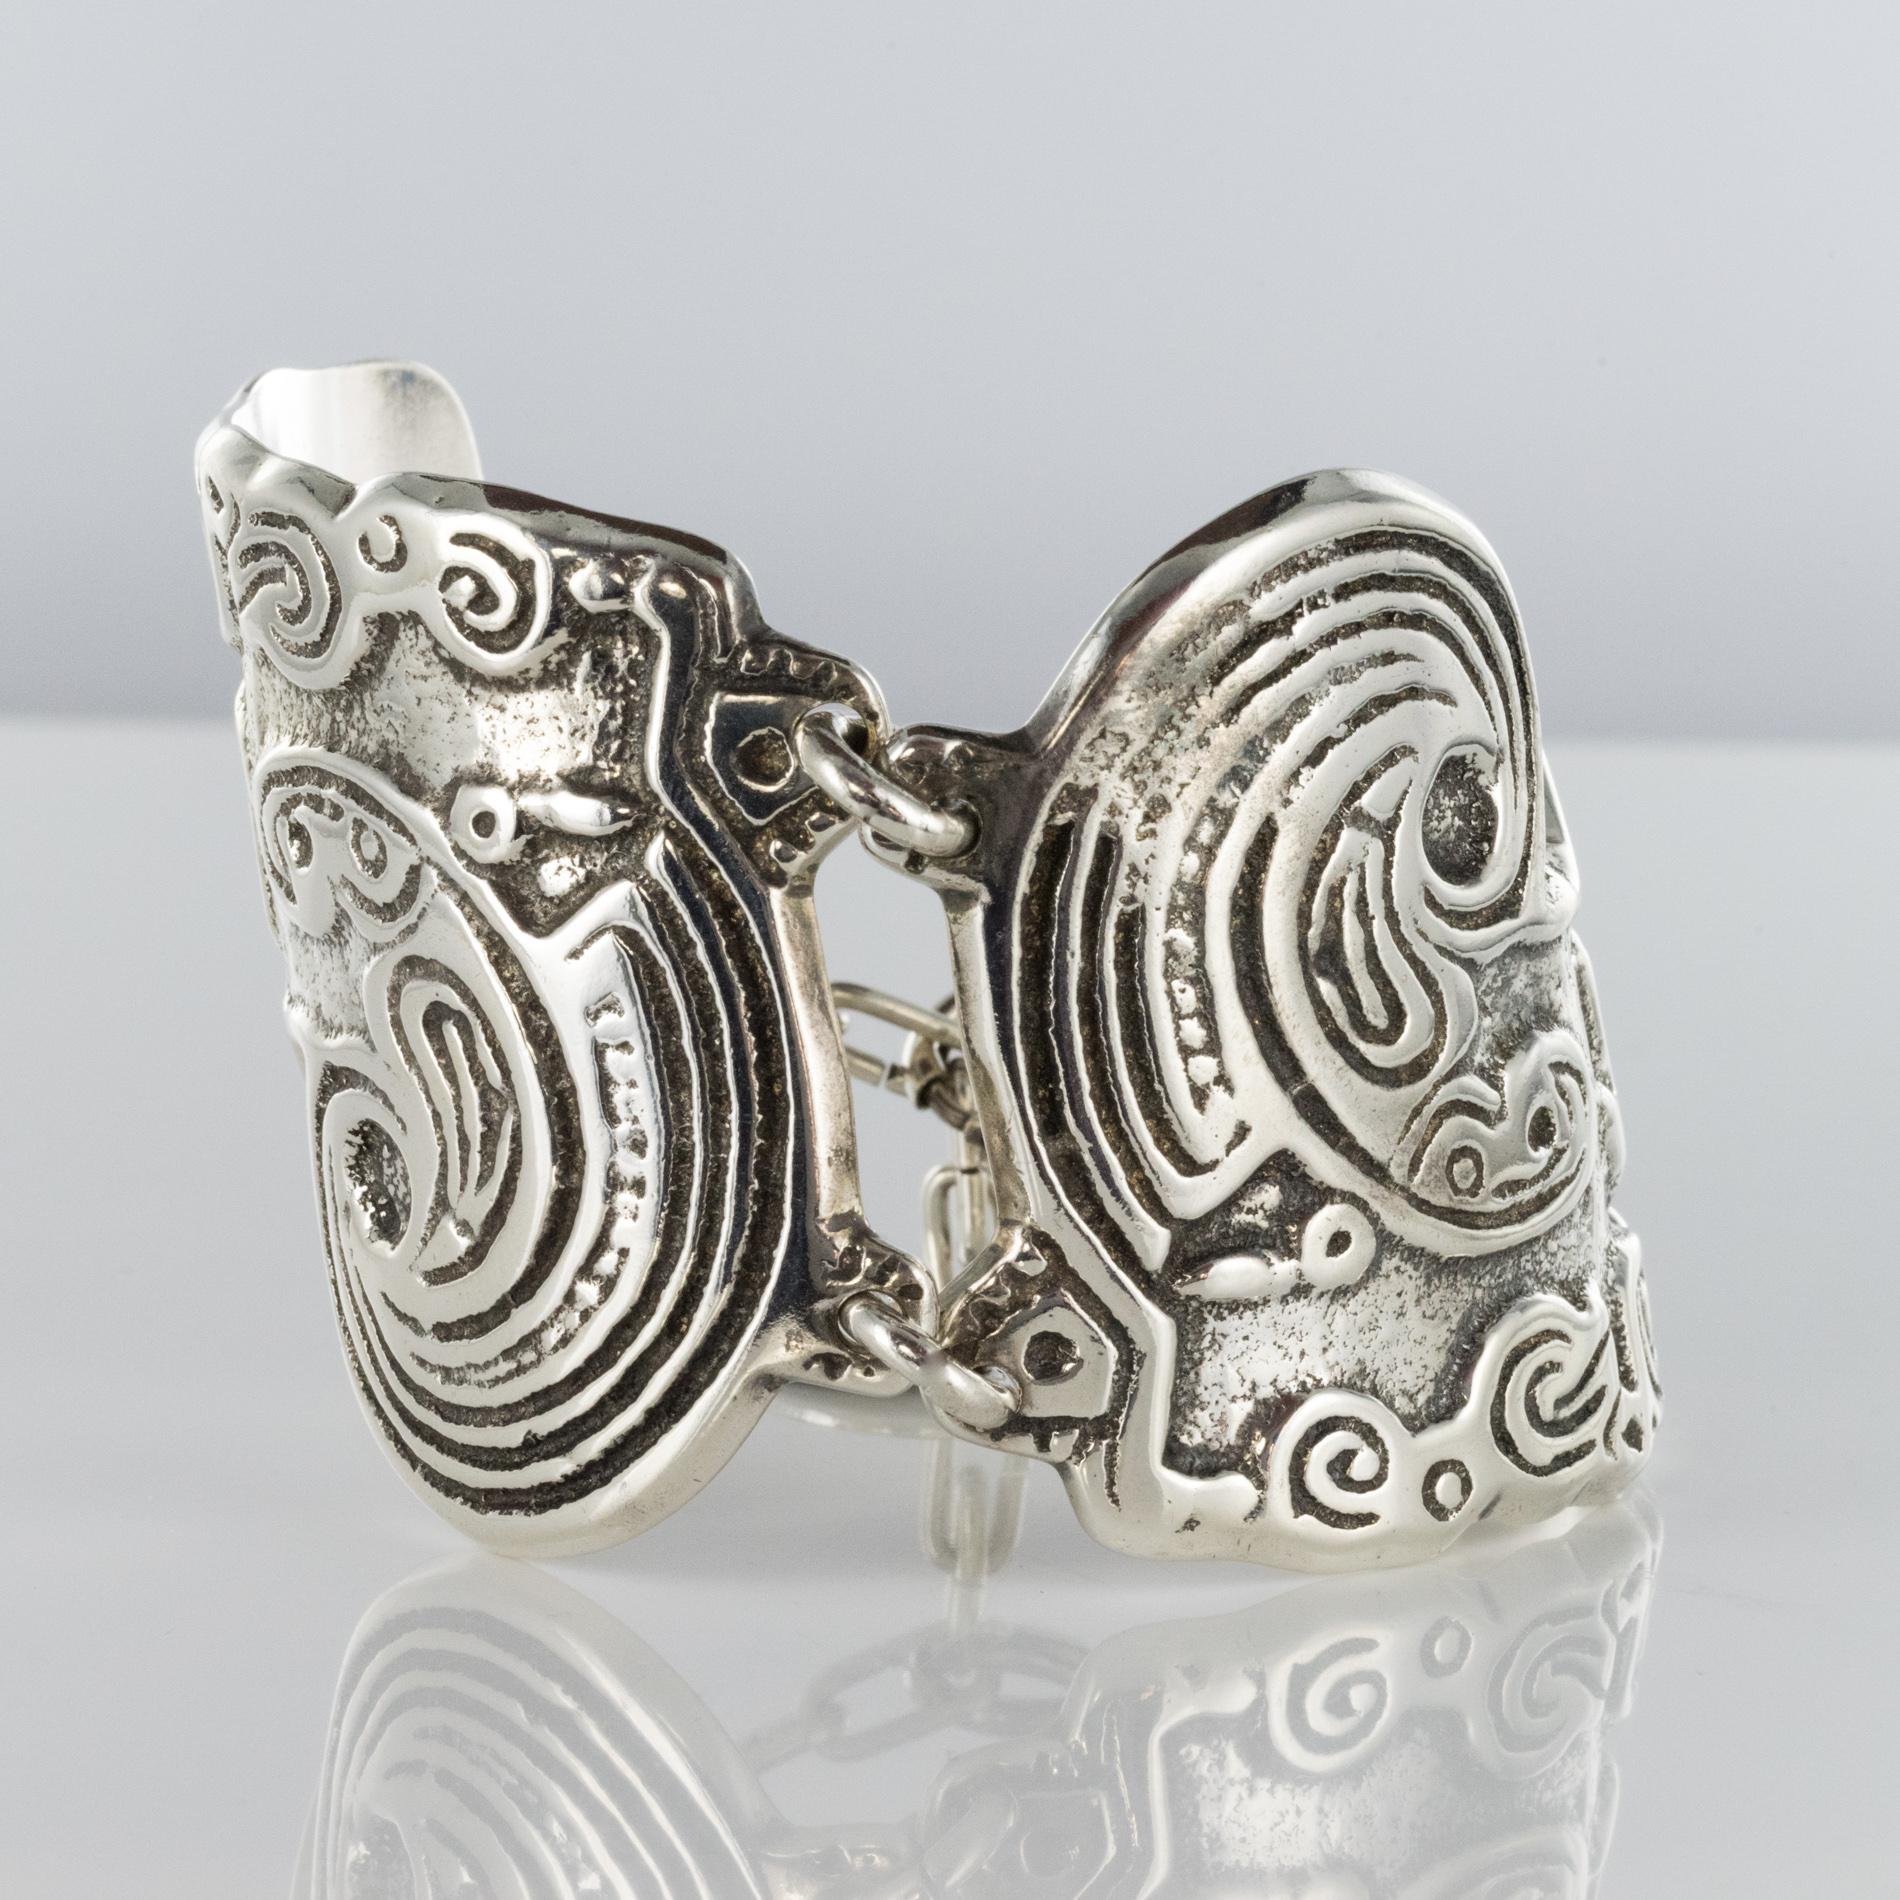 Bracelet in silver plated.
Large modernist bracelet, it consists of 2 curved plates interconnected by solid silver plated rings. Each plate has a modernist engraved decoration. The silver plated bracelet closes with a chain with spring ring and has